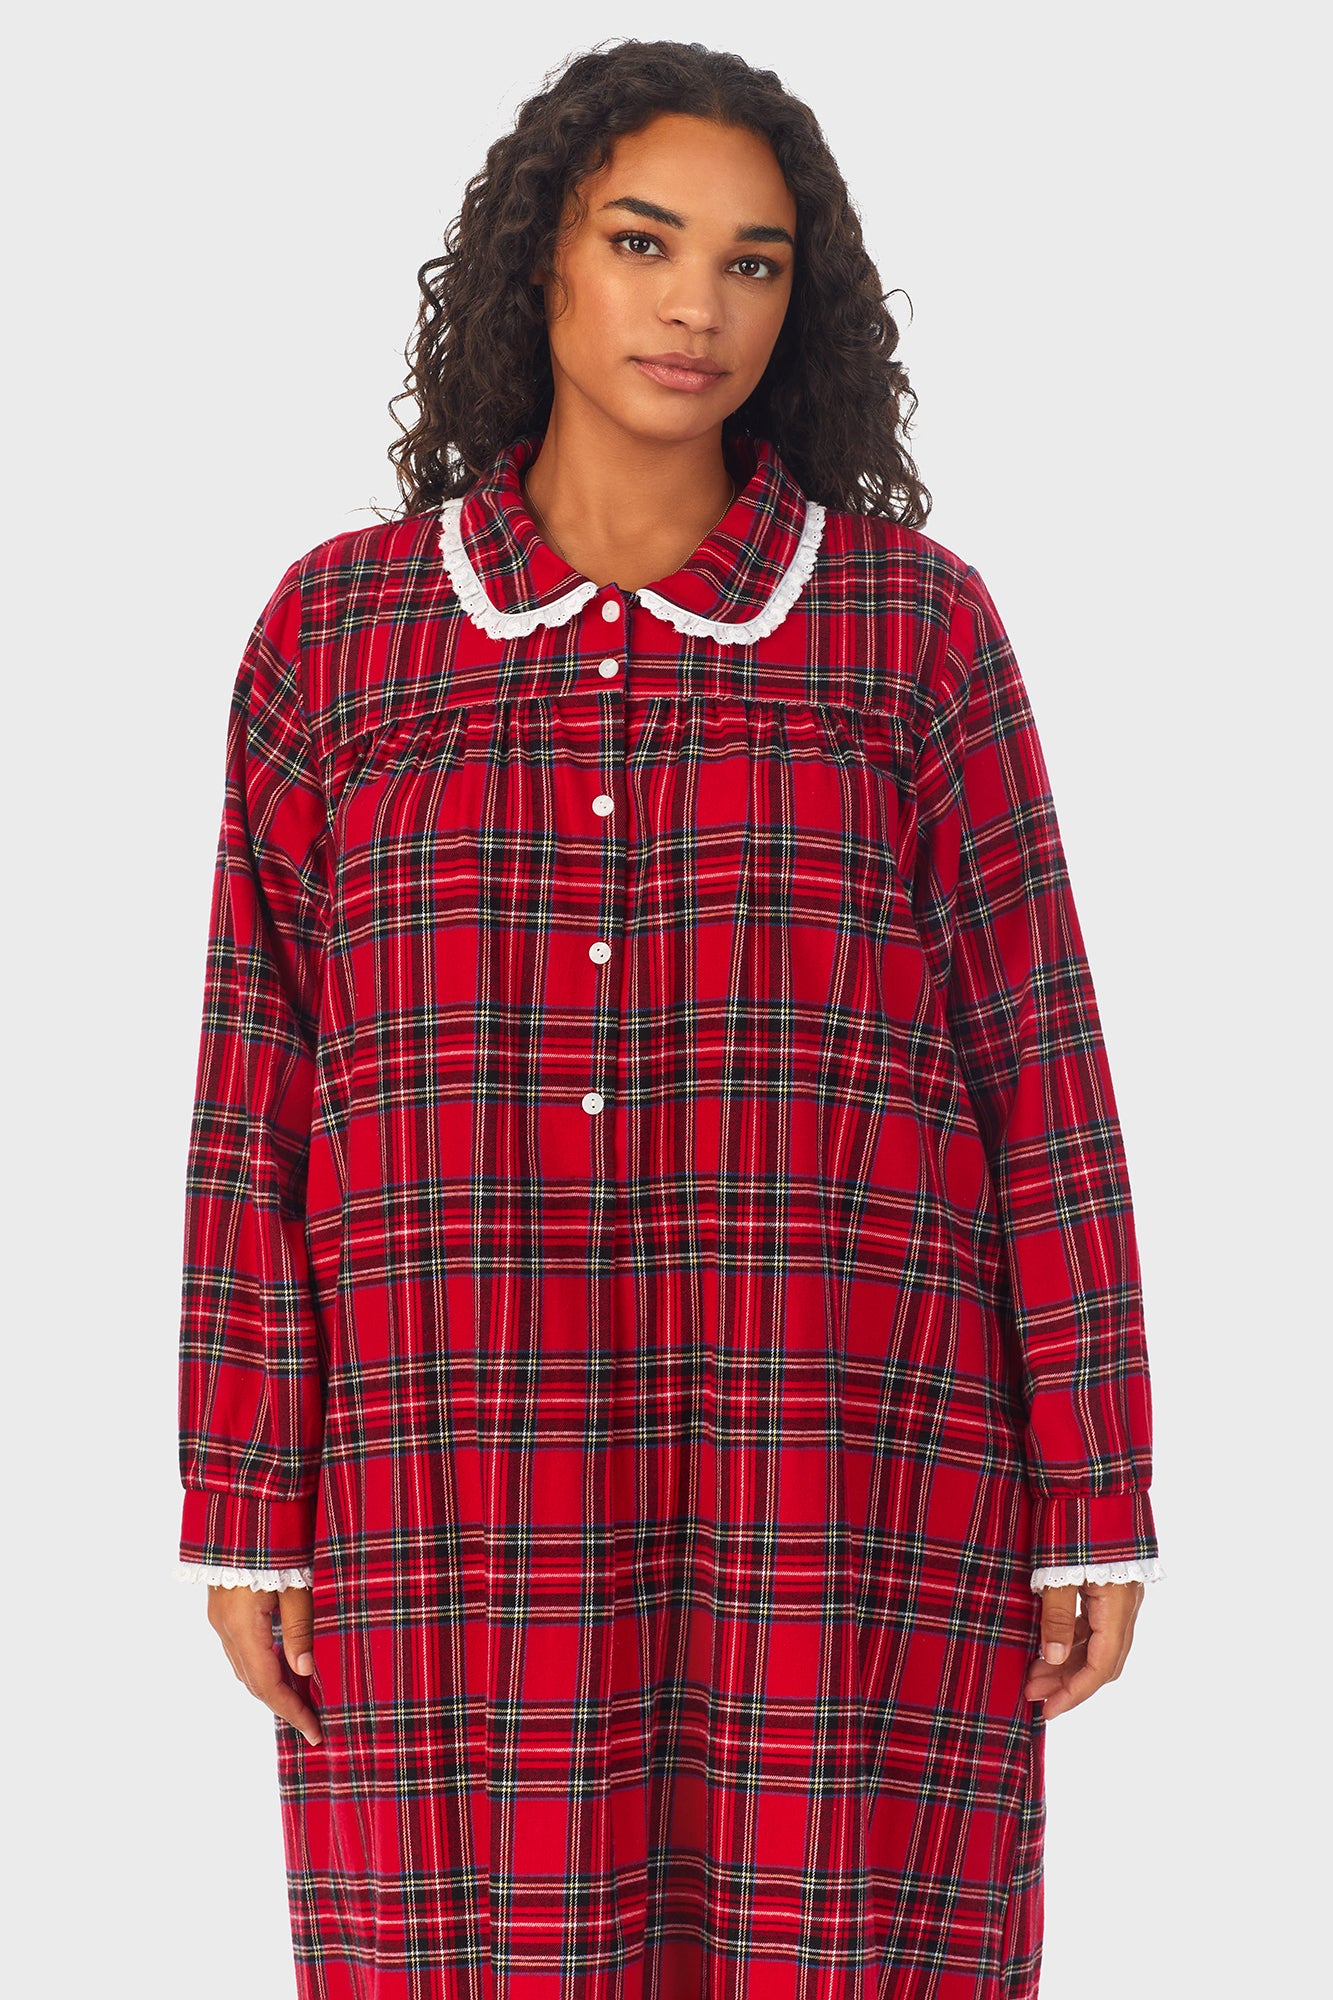 A lady weraing red Tartan Peter Pan Flannel Gown Plus